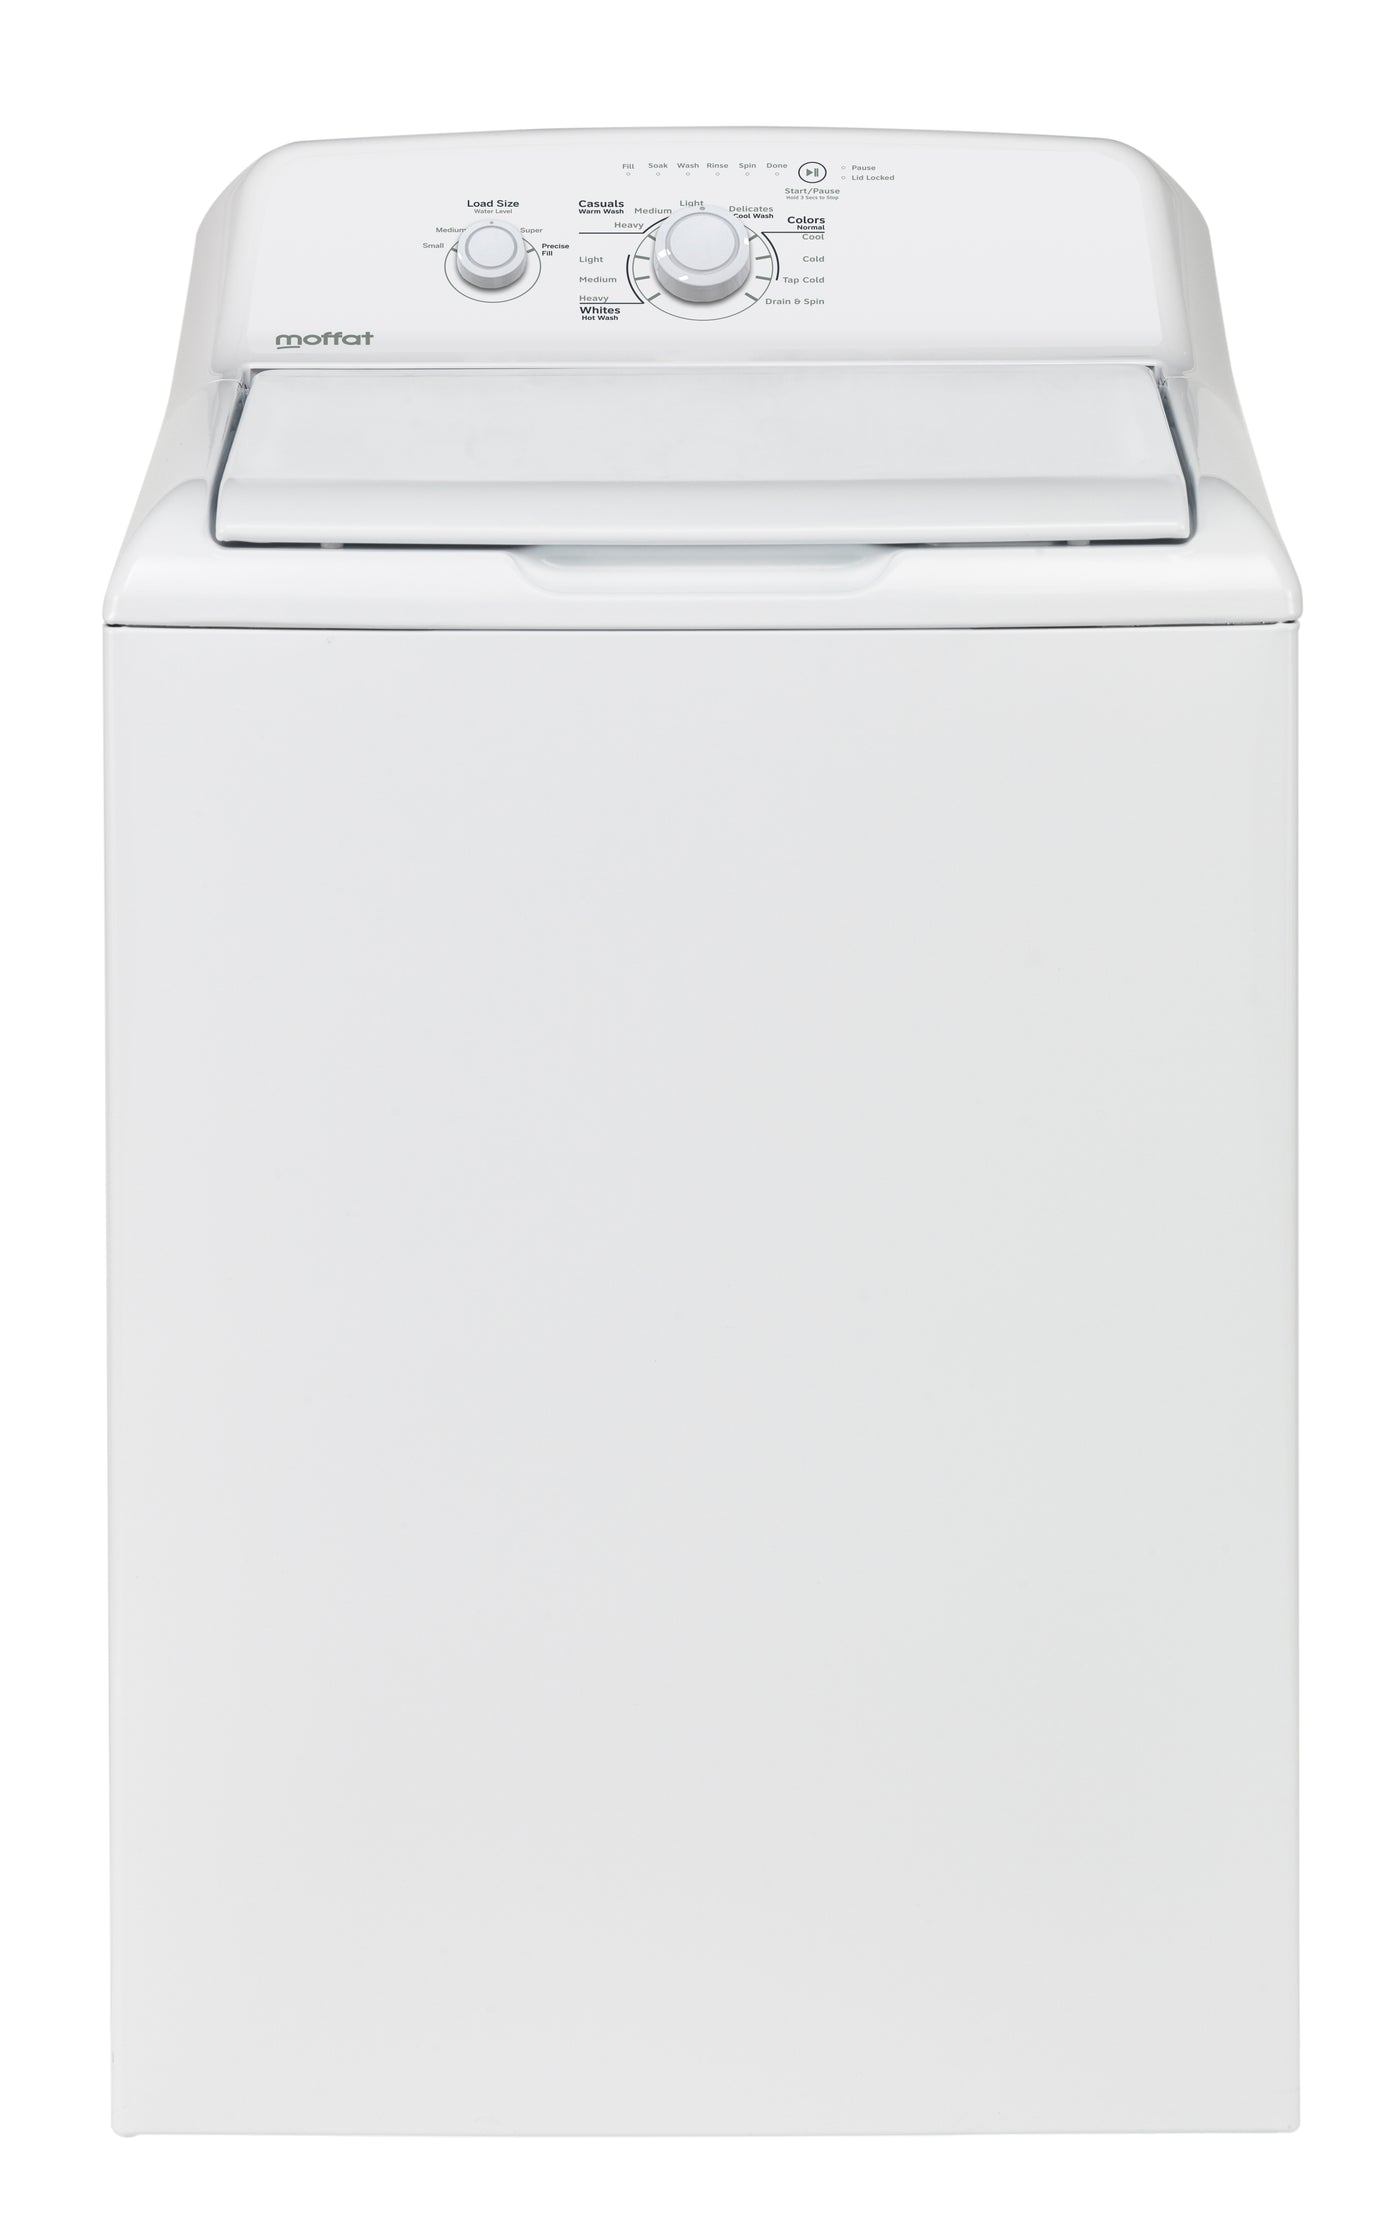 Moffat White Top-Load Washer (4.4 Cu. Ft.) - MTW201BMRWW